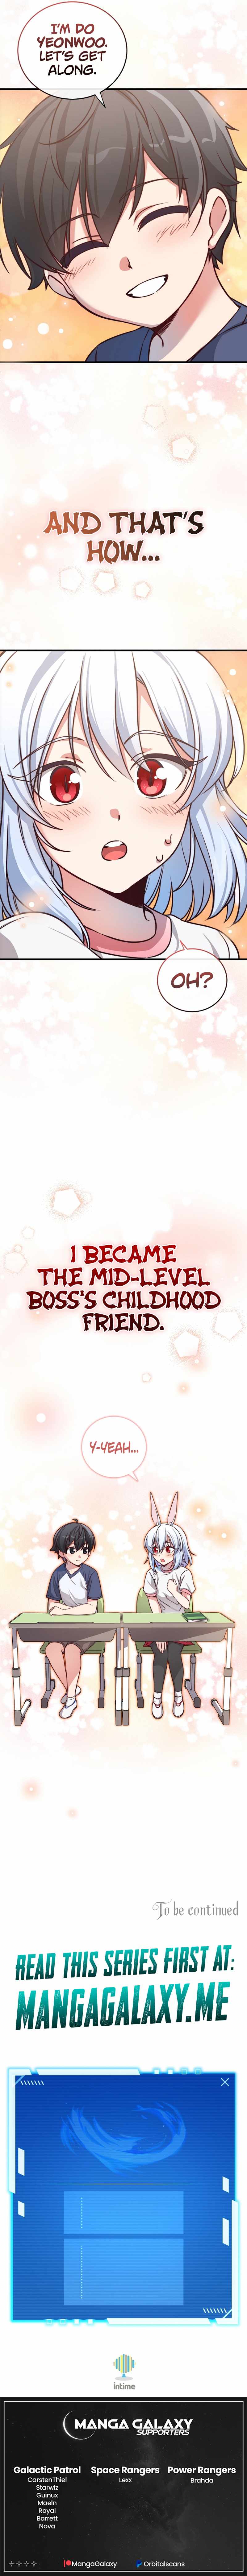 I Became A Childhood Friend of A Mid Level Boss Chapter 1